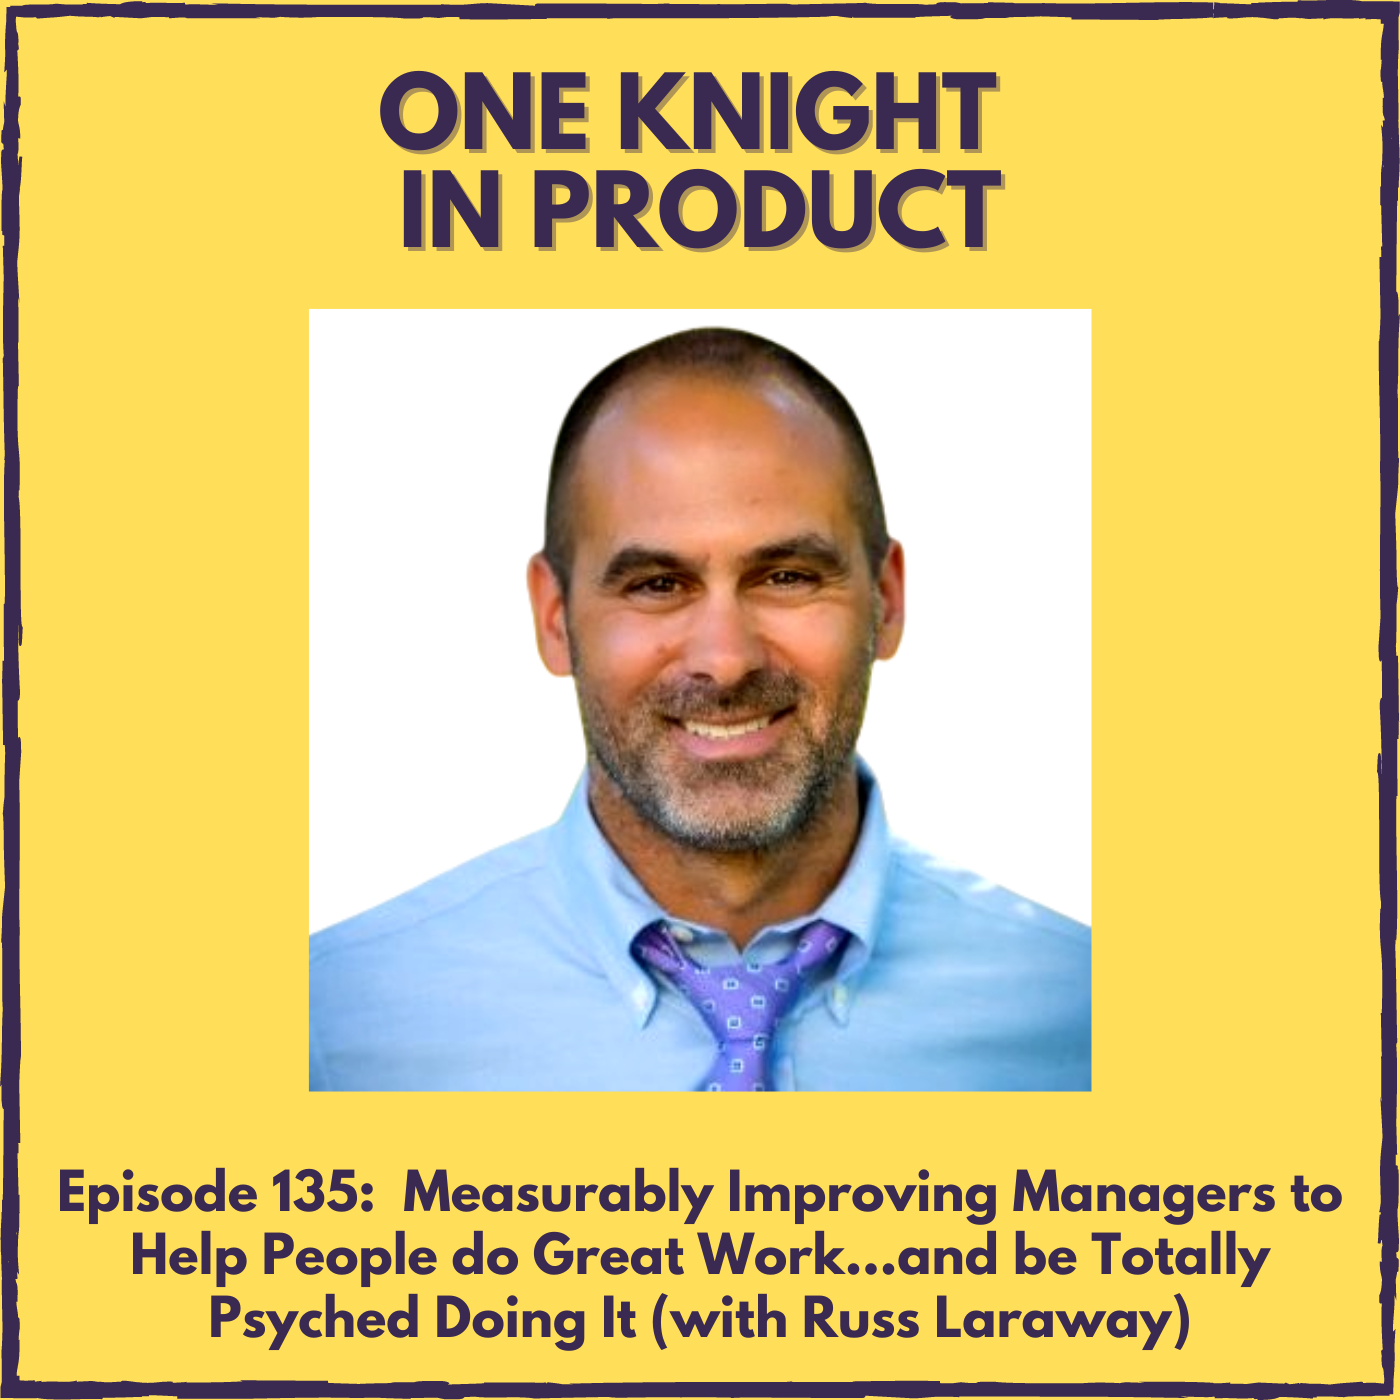 Measurably Improving Managers to Help People do Great Work... and be Totally Psyched Doing It (with Russ Laraway, author ”When They Win, You Win”)